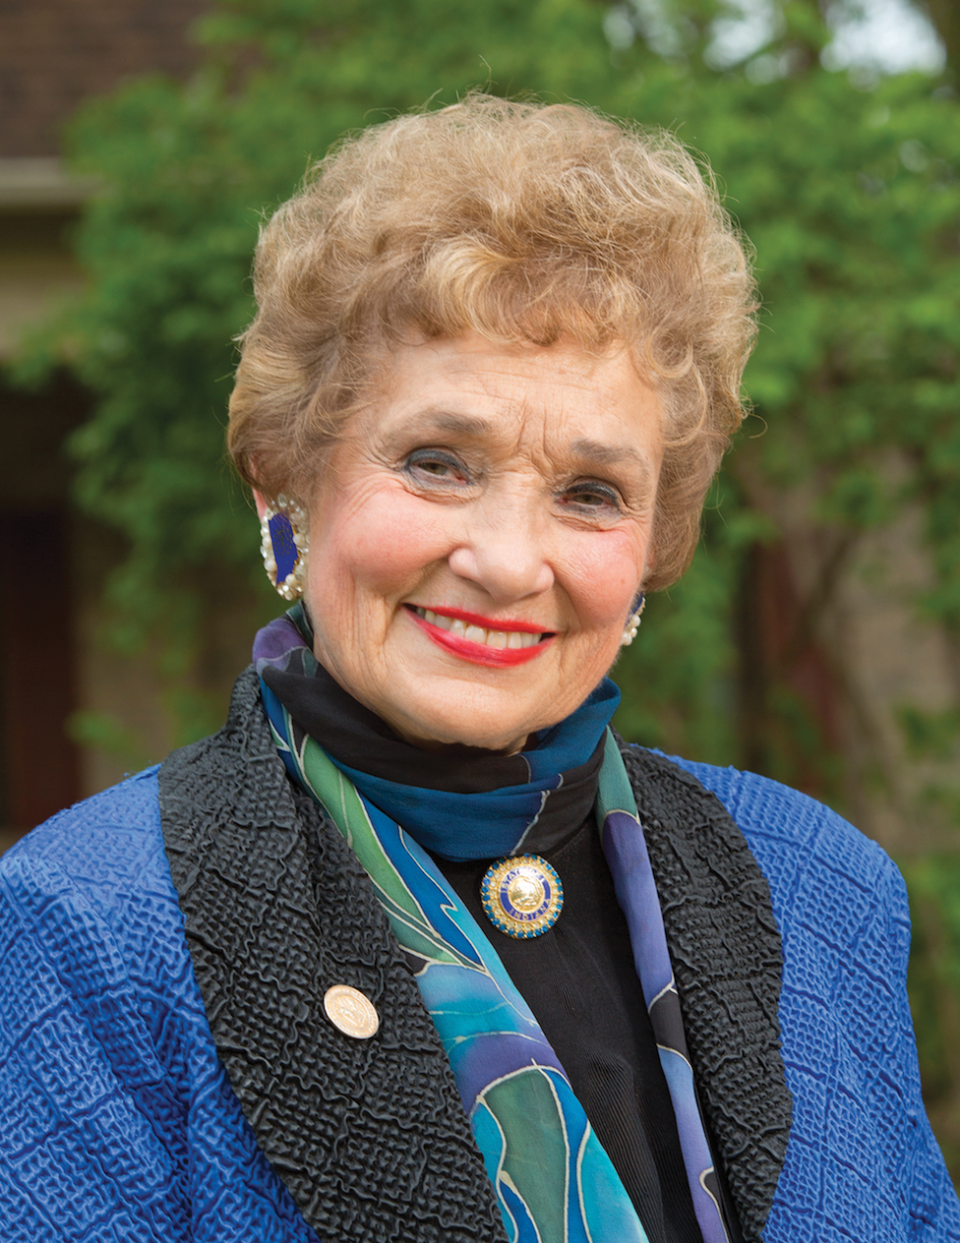 State Rep. Sheila Klinker was first elected to the Indiana House of Representatives in 1982 to represent Indiana House District 27, serving parts of both Lafayette and West Lafayette.